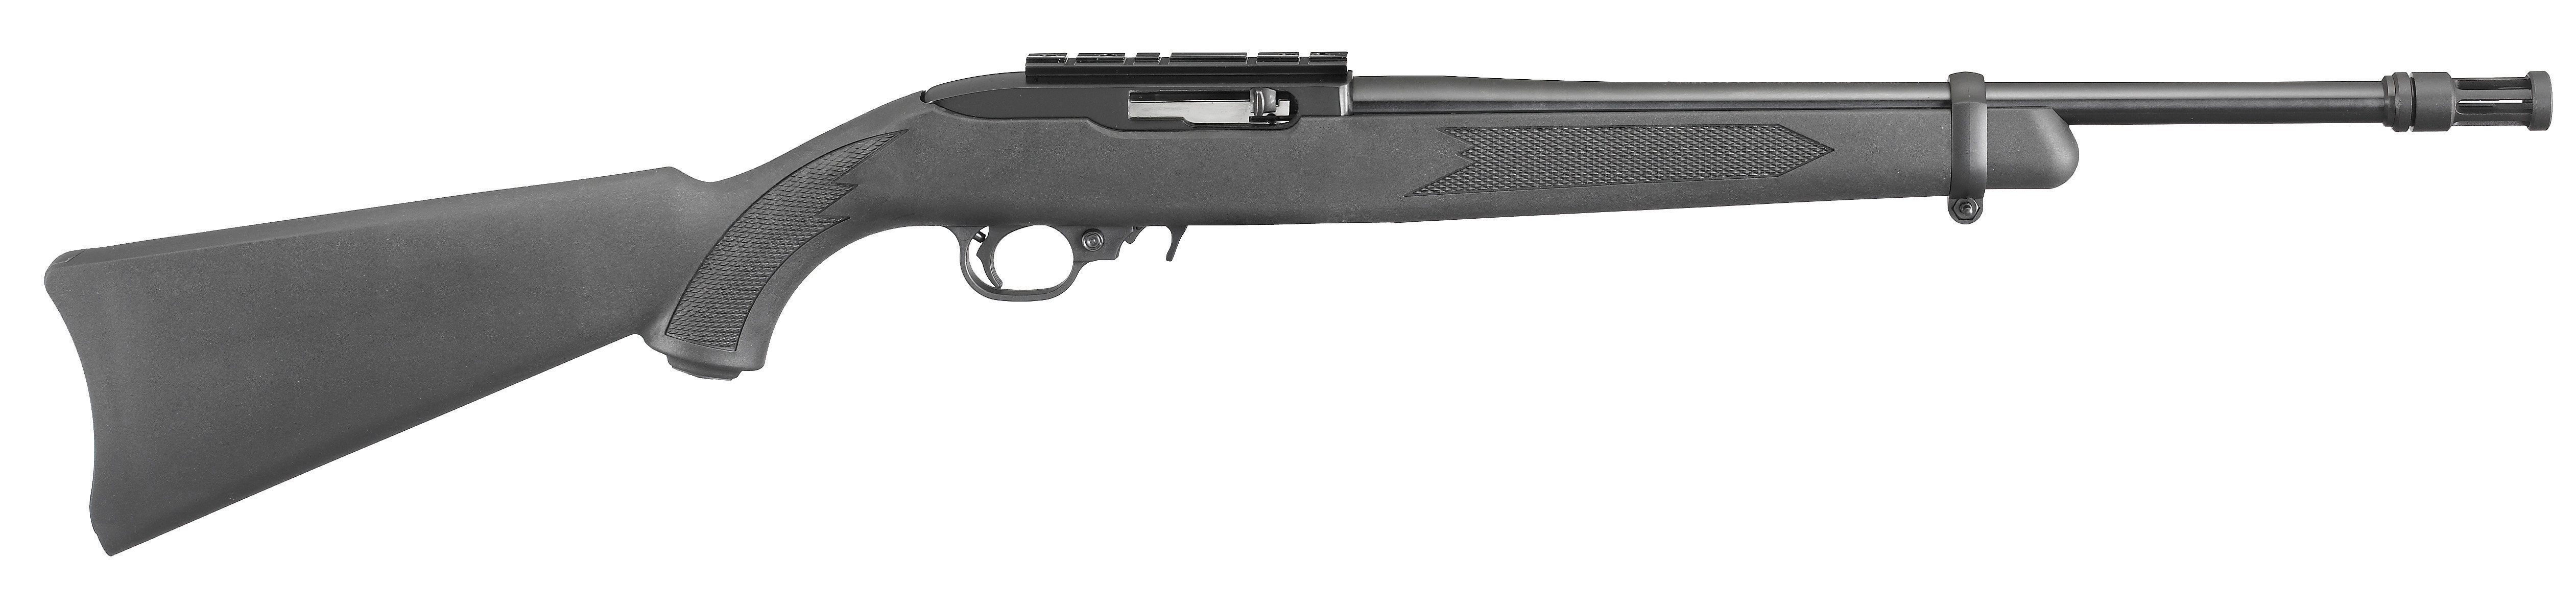 weapons, ruger 10/22 rifle